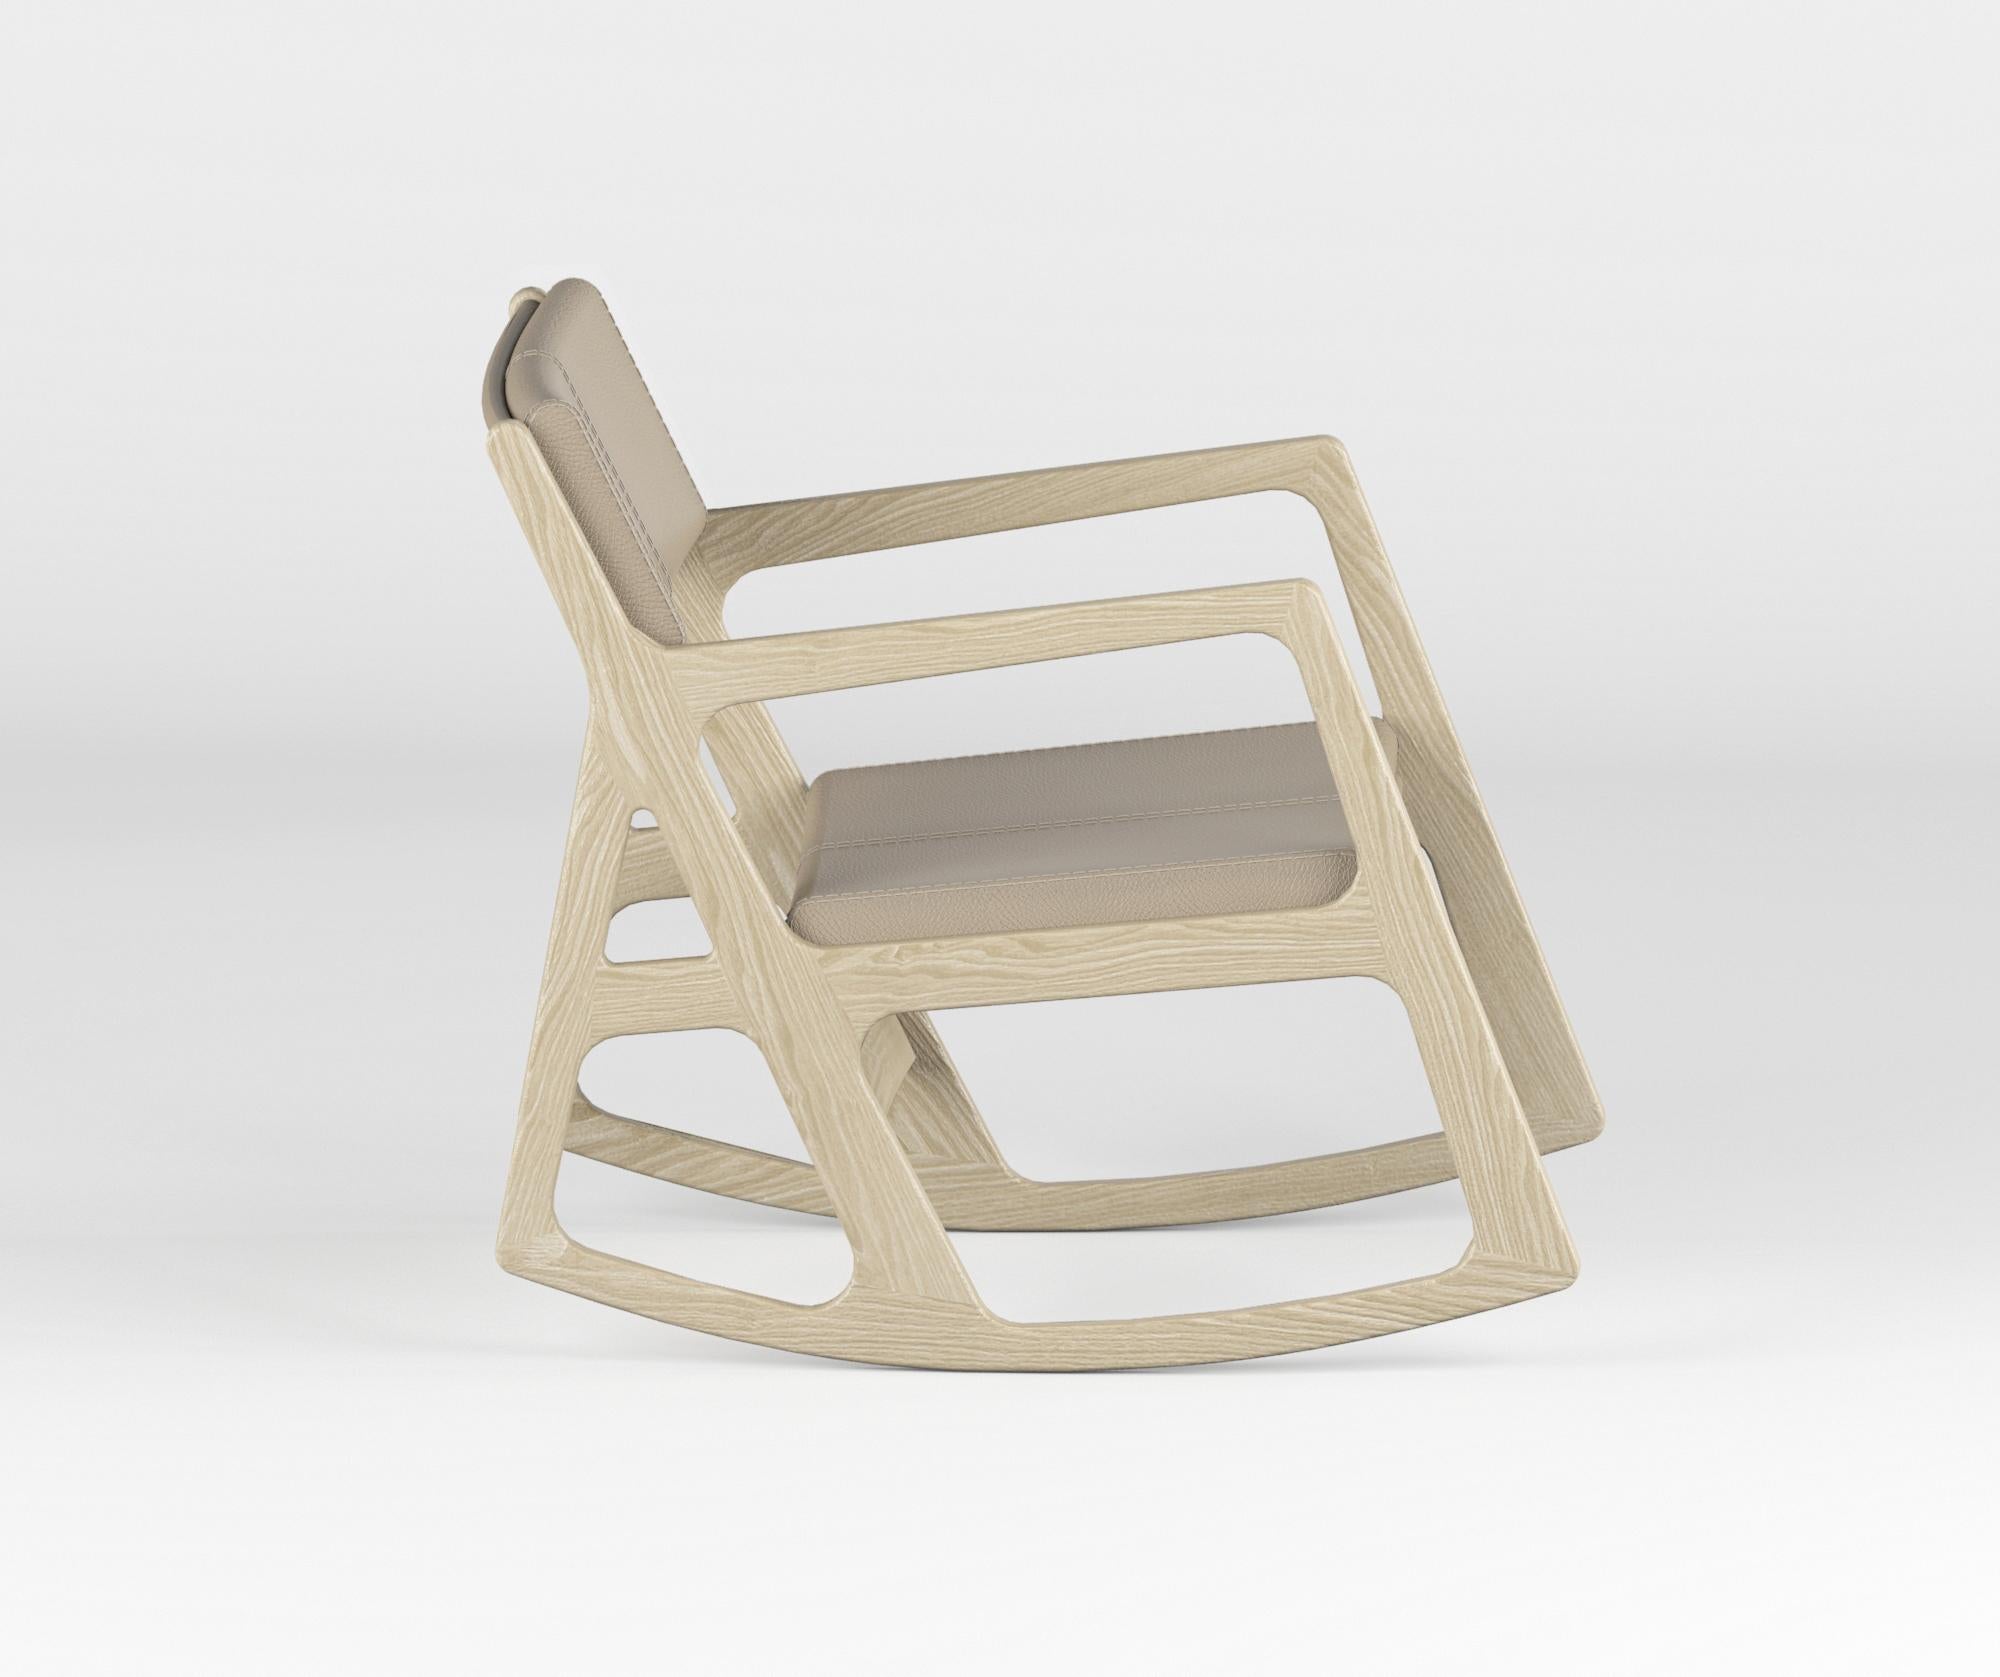 Sleepy is a contemporary interpretation of an amusing icon of our collective childhood: the rocking chair. Graphical and boldfaced, the chair’s form is slender and sophisticated in premium solid hardwood, yet with a soft, playful spirit of